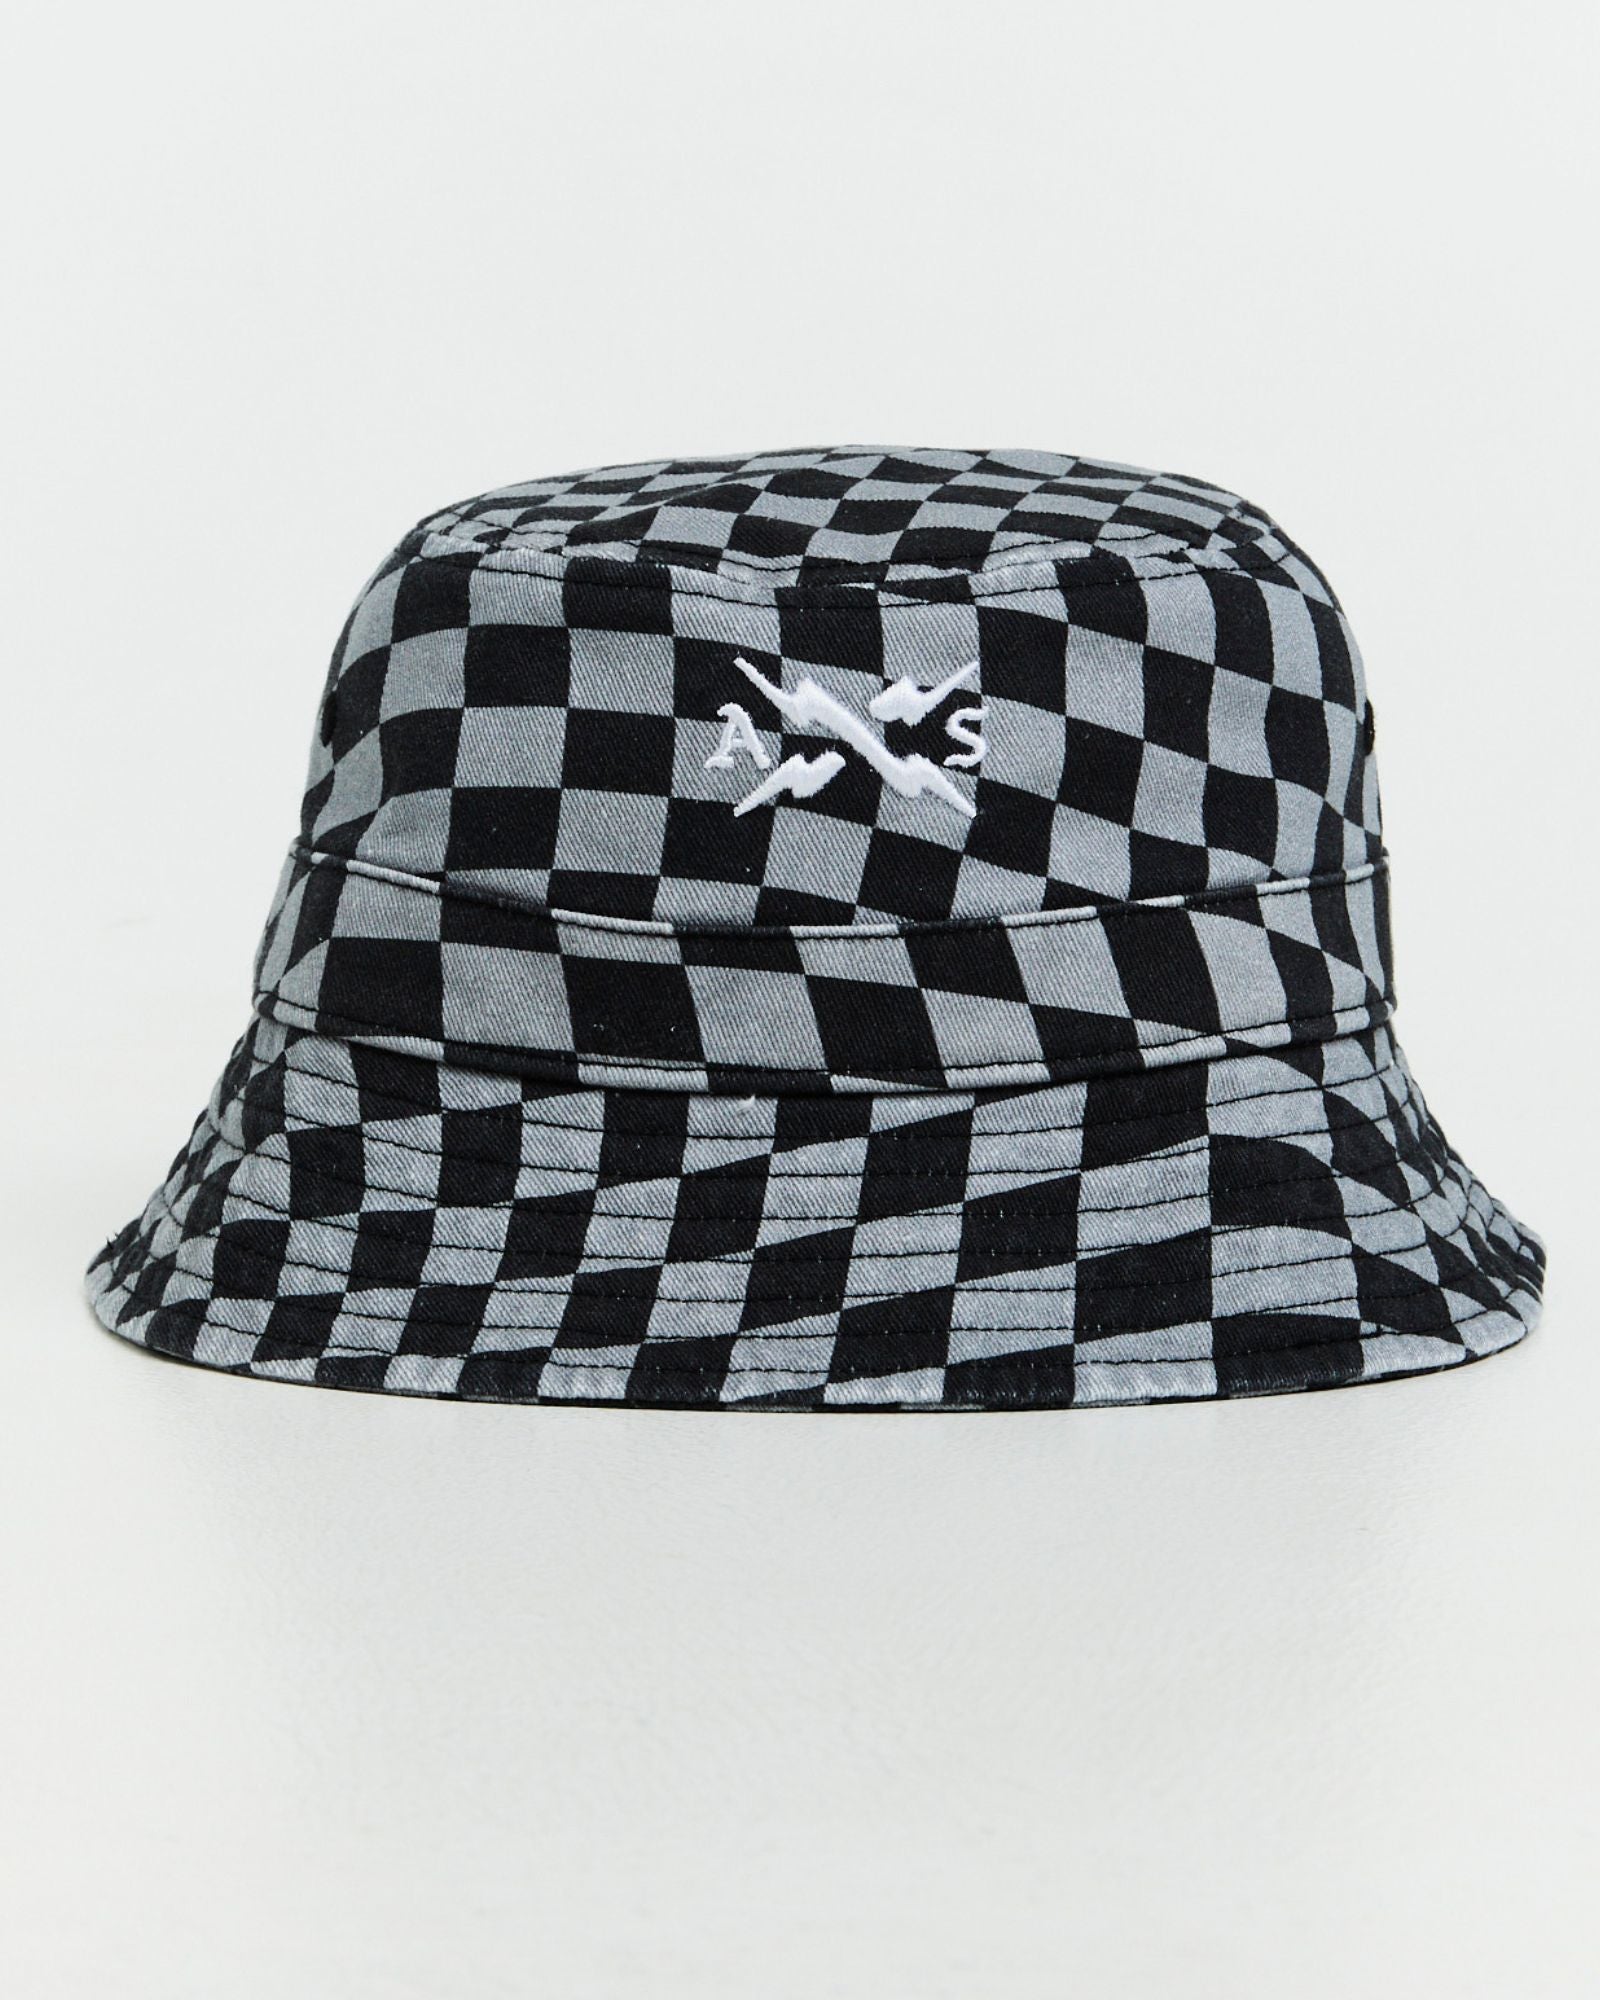 Alphabet Soup's Warped Bucket Hat for boys aged 2-16. Featuring 100% cotton twill, grey check pattern, unstructured style, eyelets, brim, logo centred.